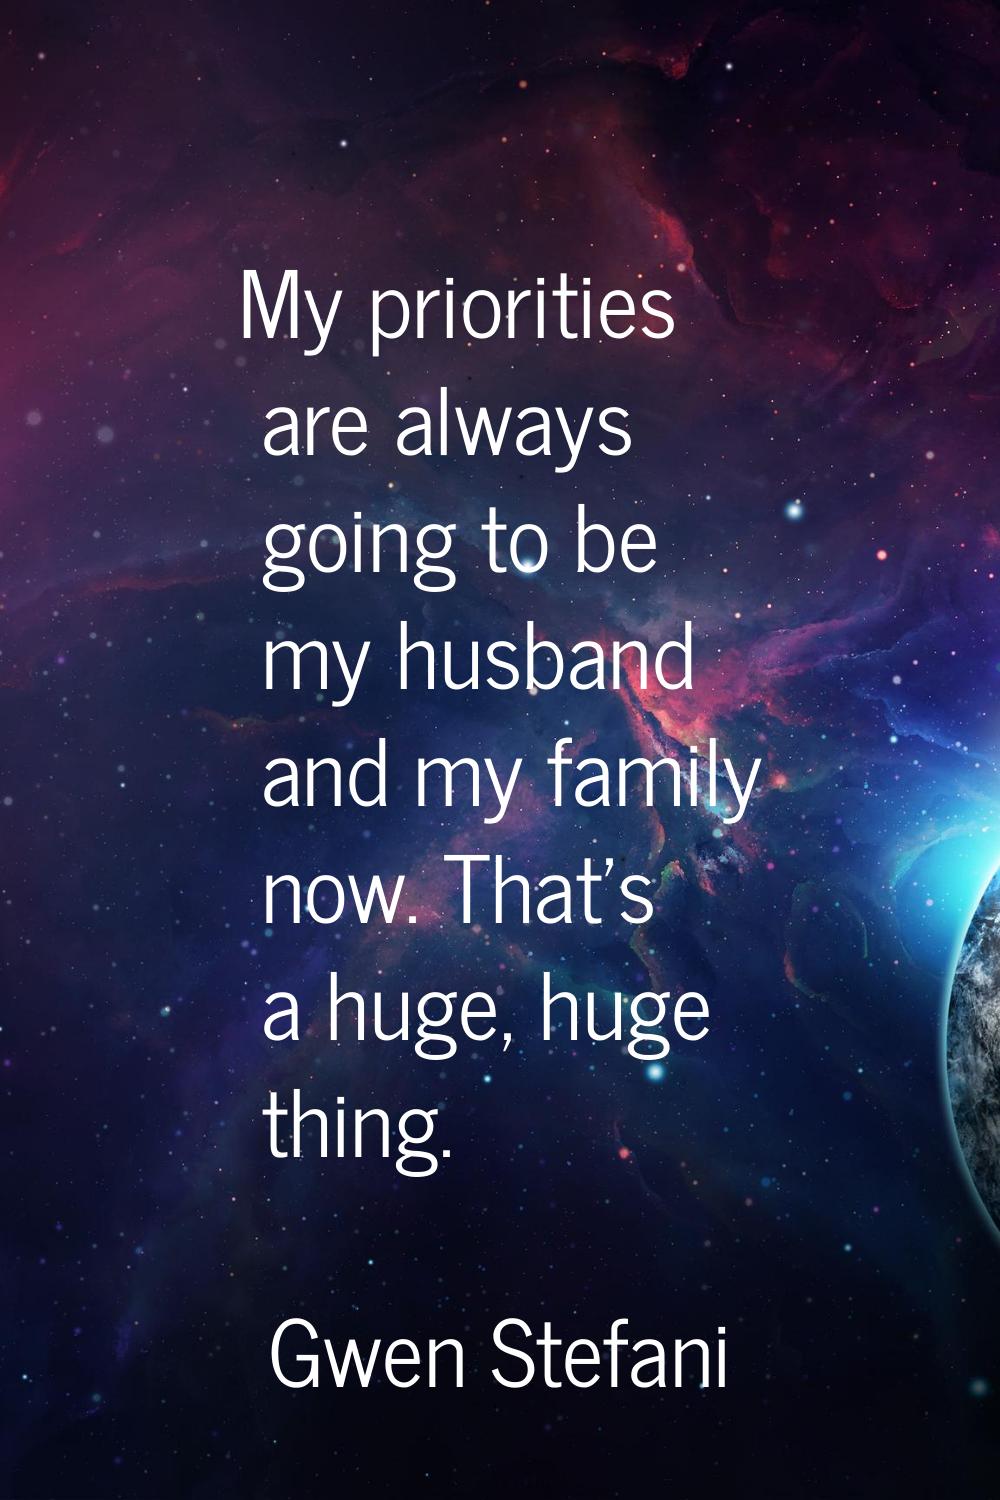 My priorities are always going to be my husband and my family now. That's a huge, huge thing.